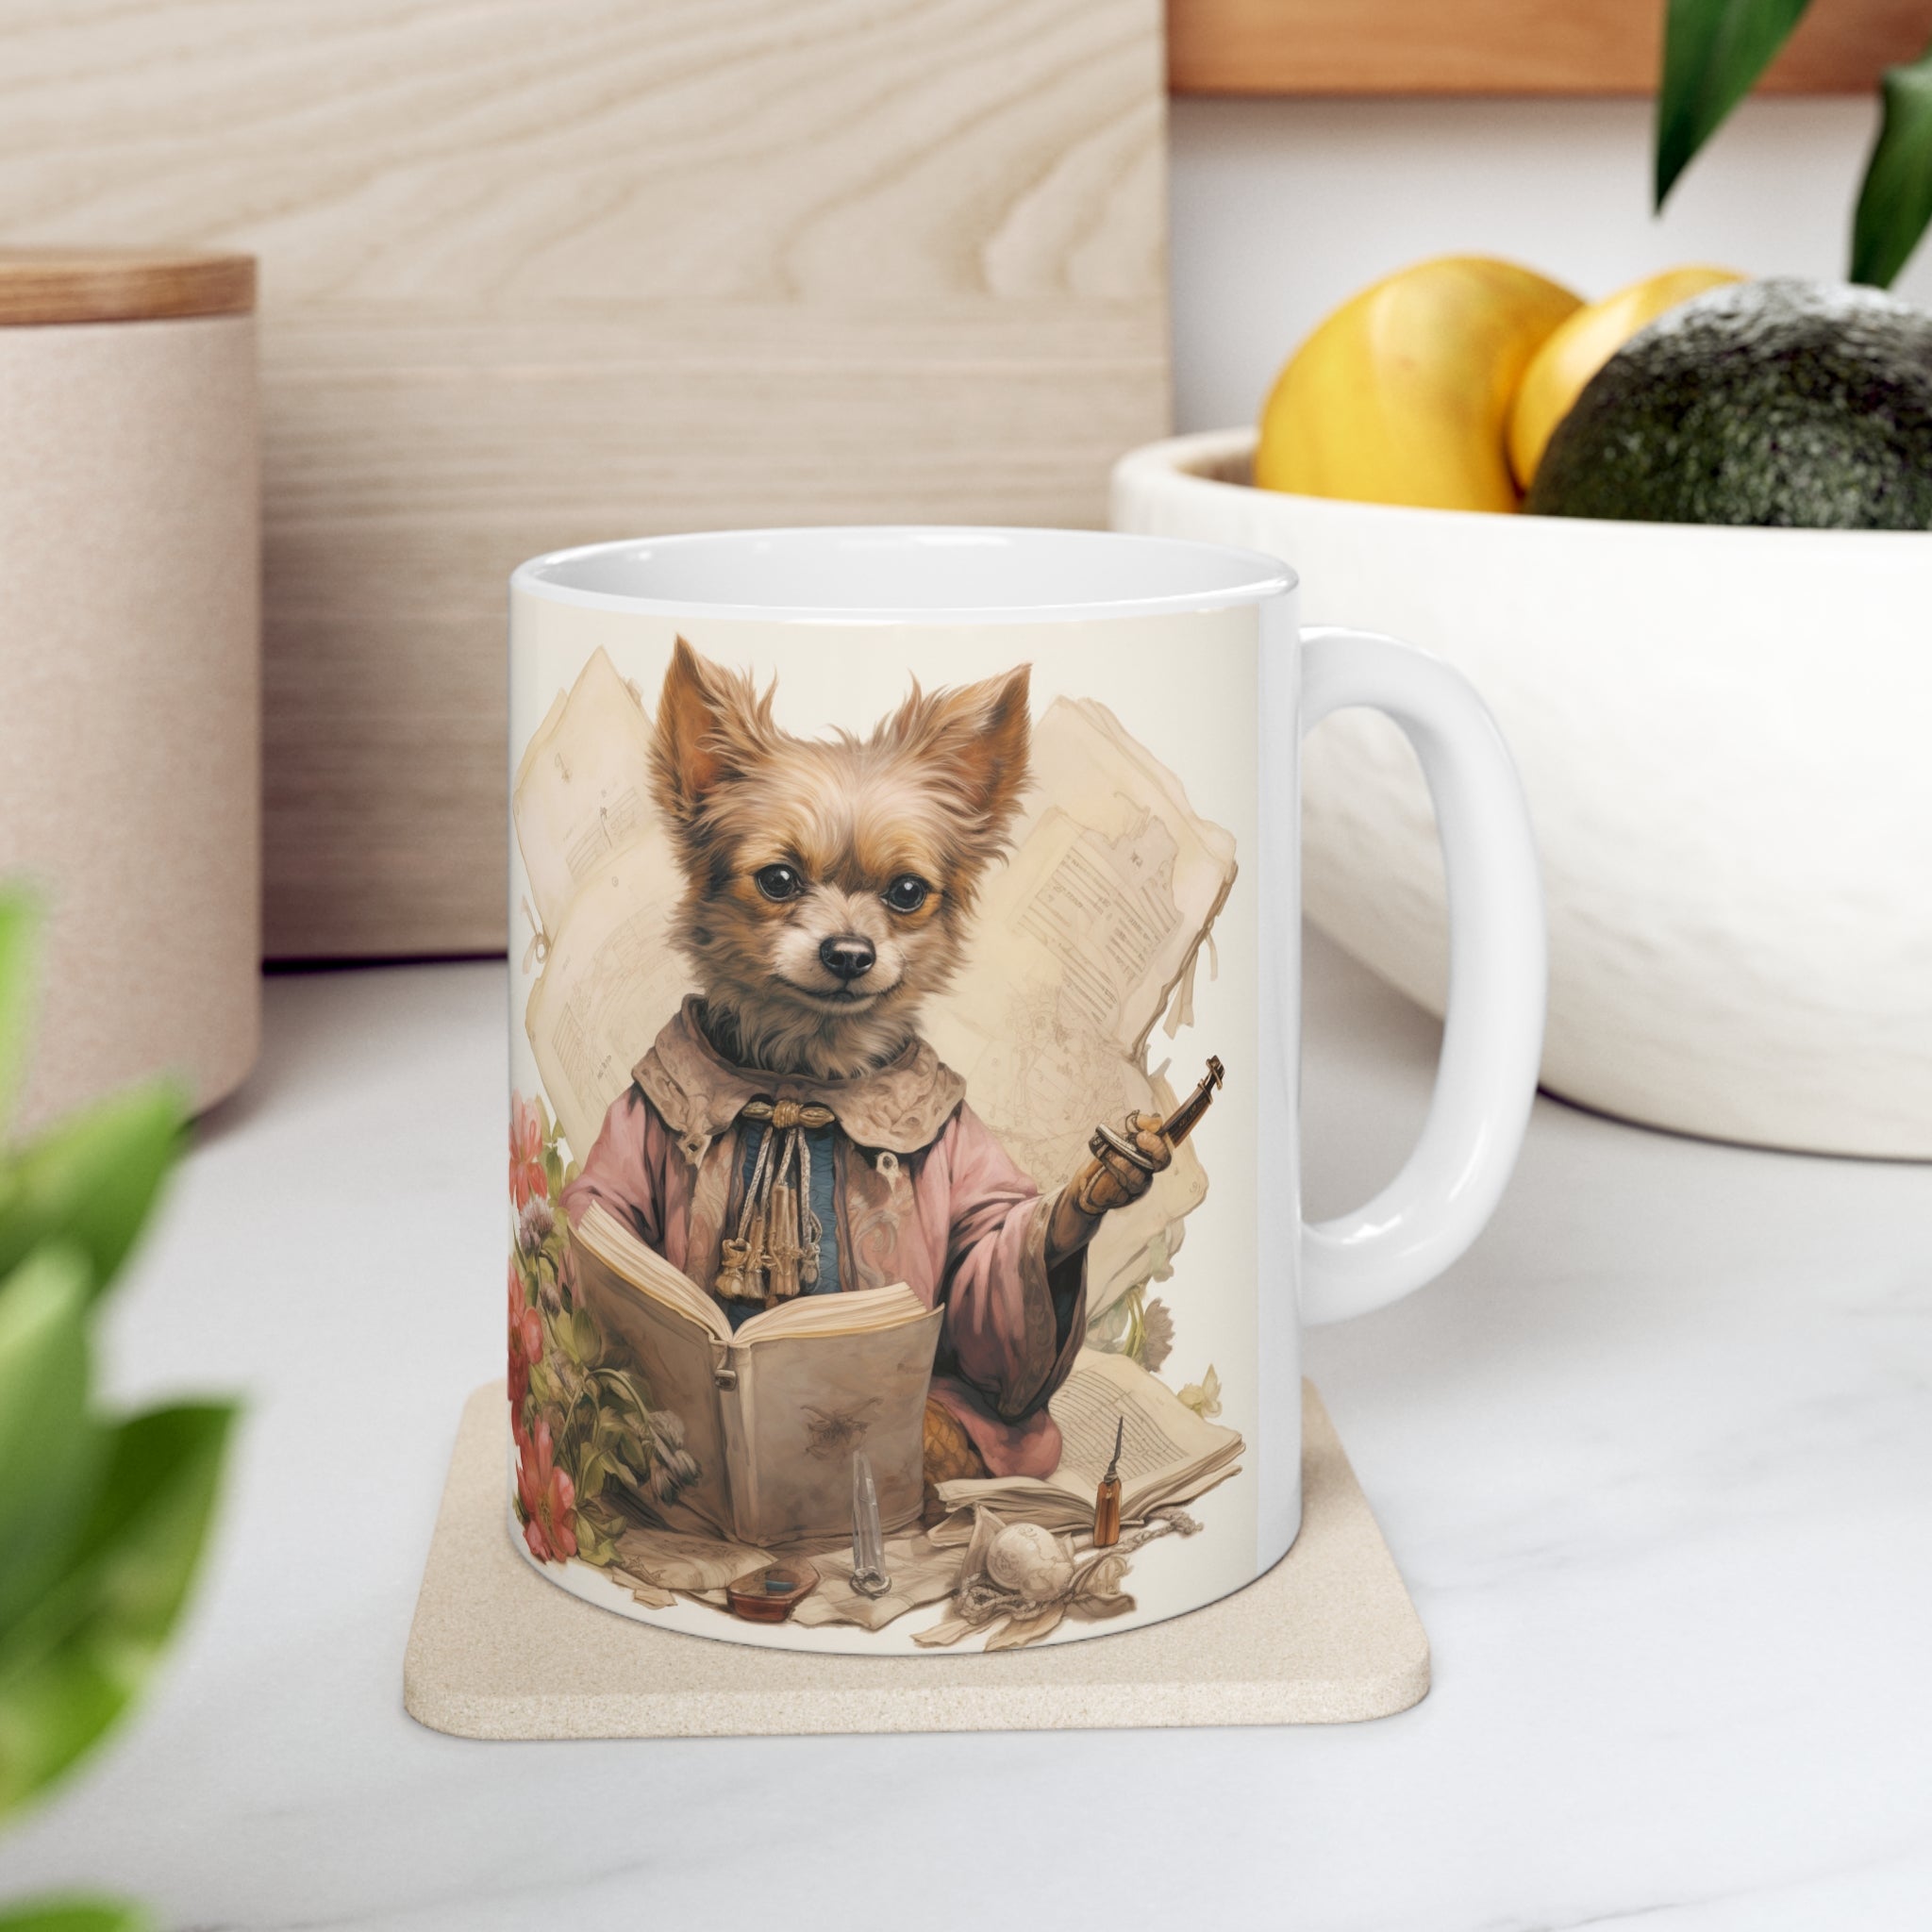 Mother's Day Awesome Gift: Relaxing Garden Pet 11oz Ceramic Mug | Exclusive Garden Puppy Design | Relaxing Durable & Aesthetic Drinkware